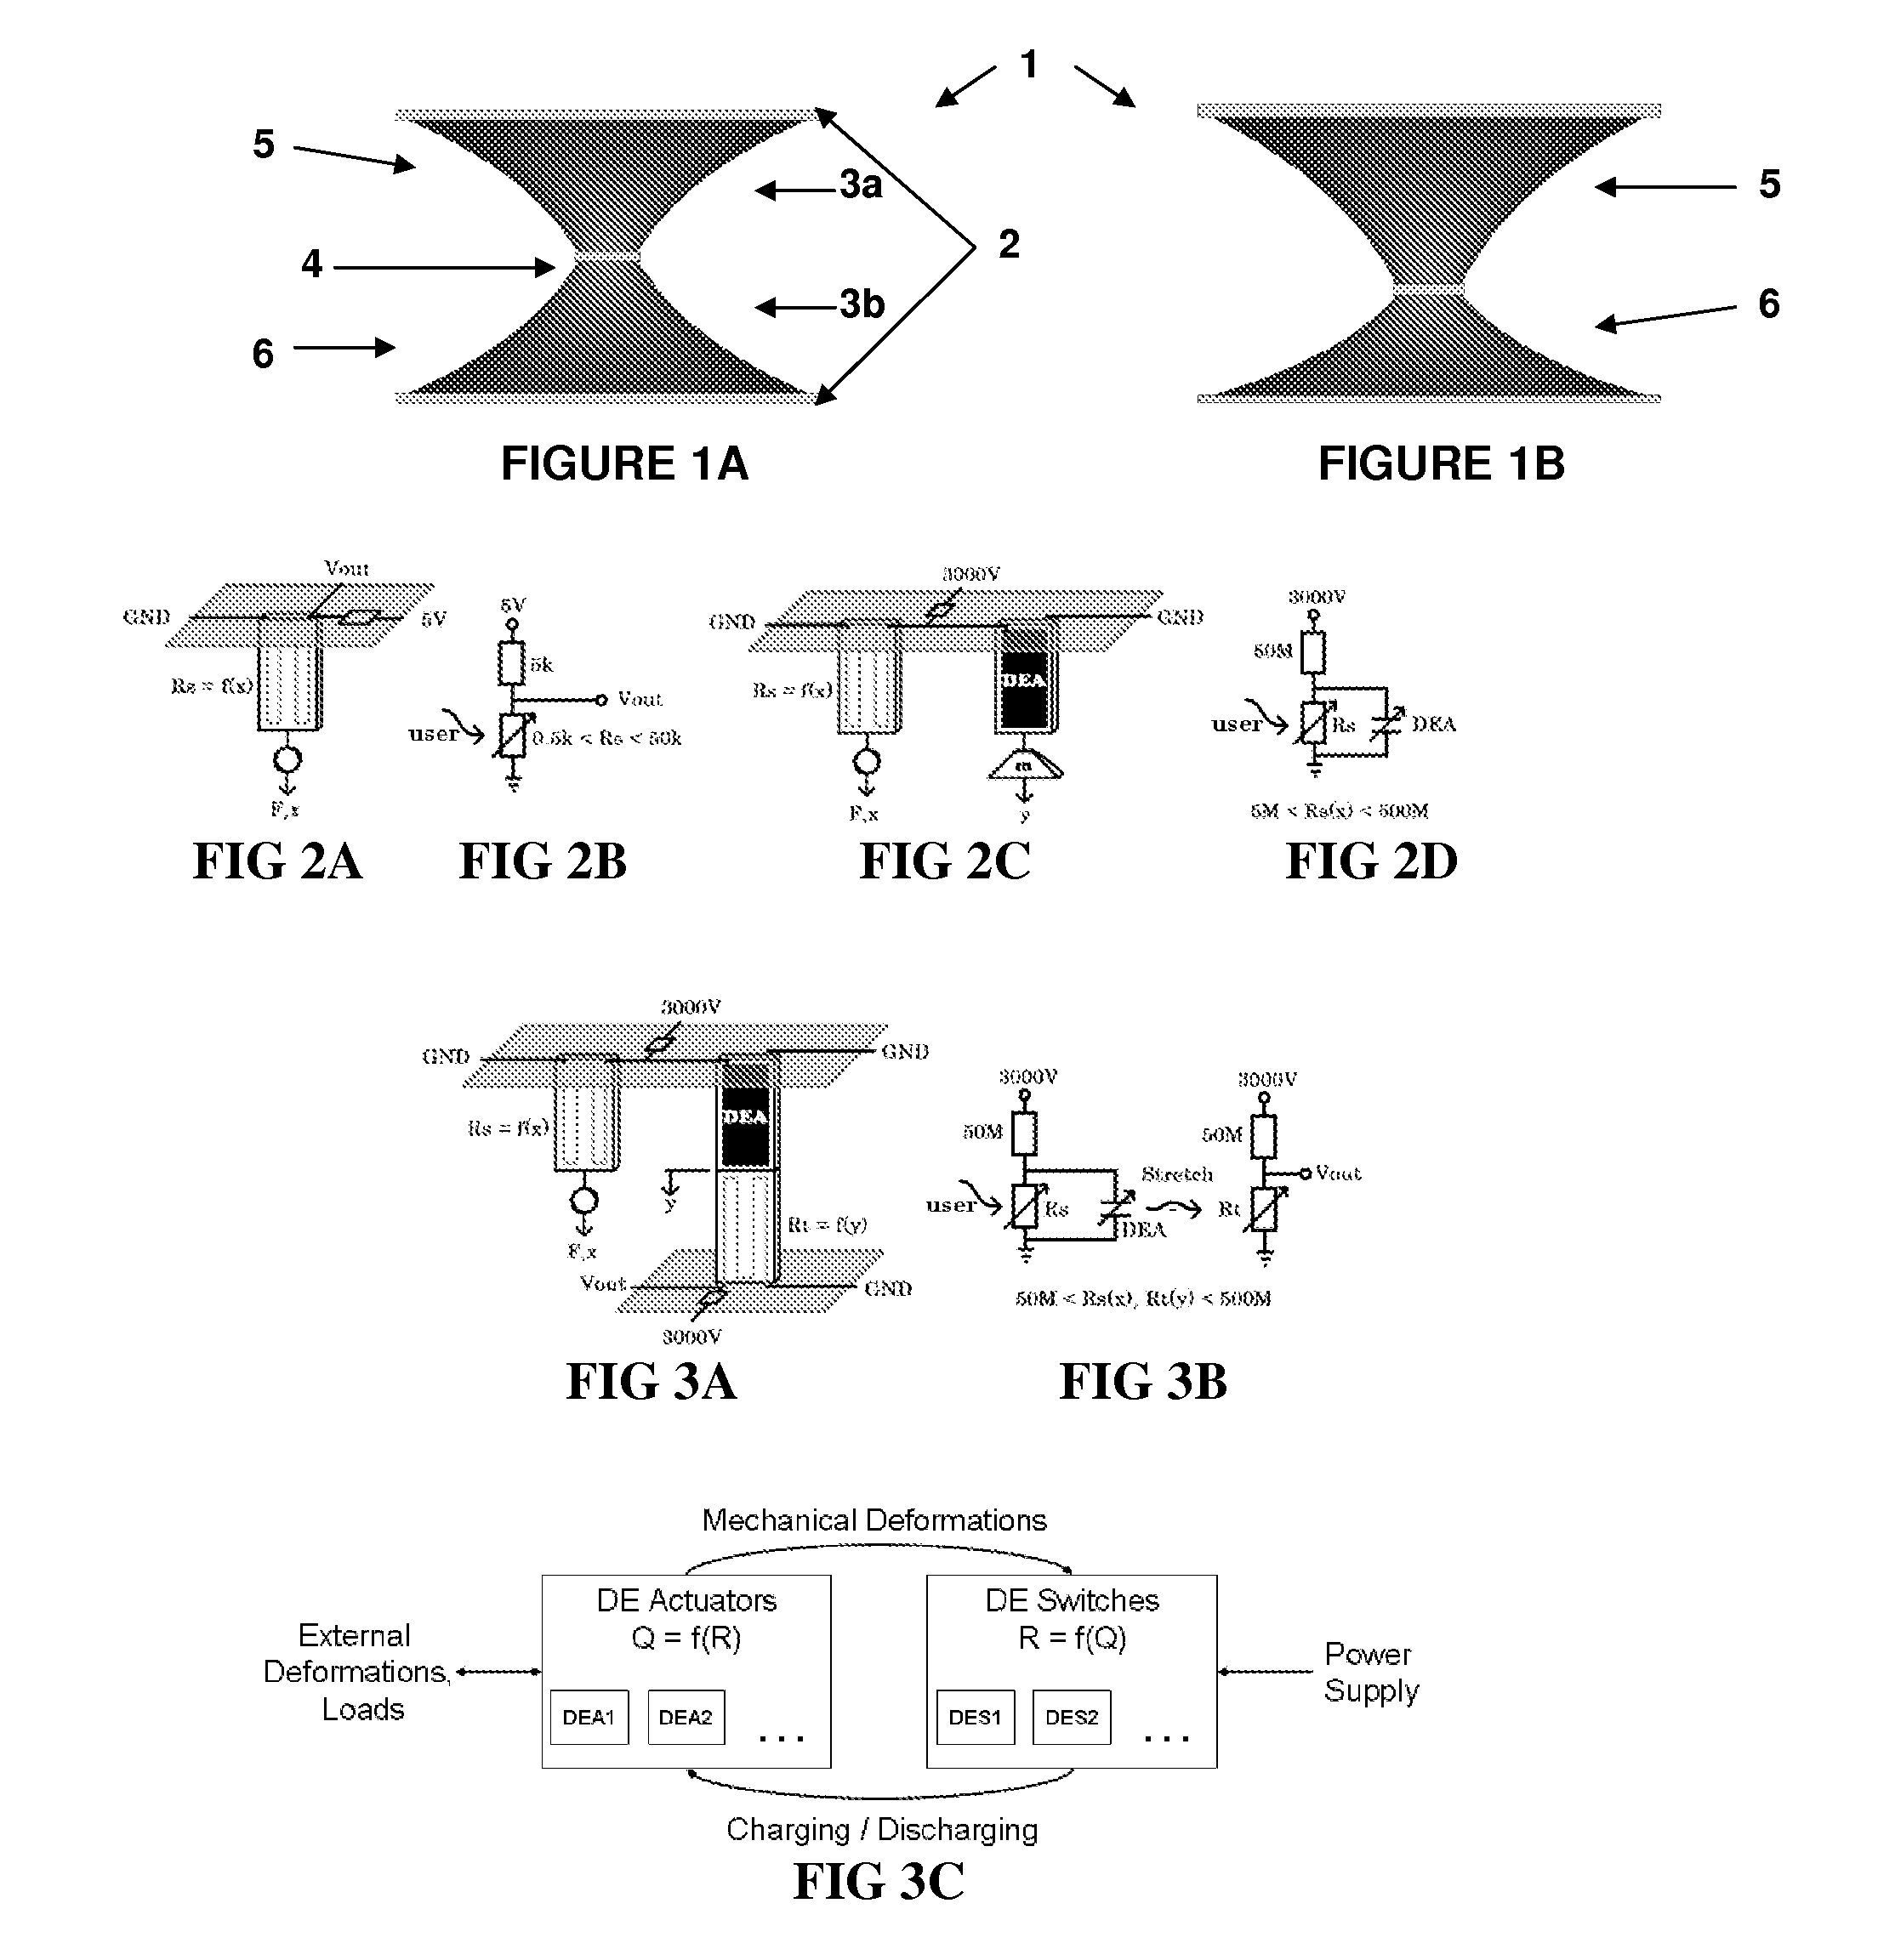 Electrical components and circuits including said components